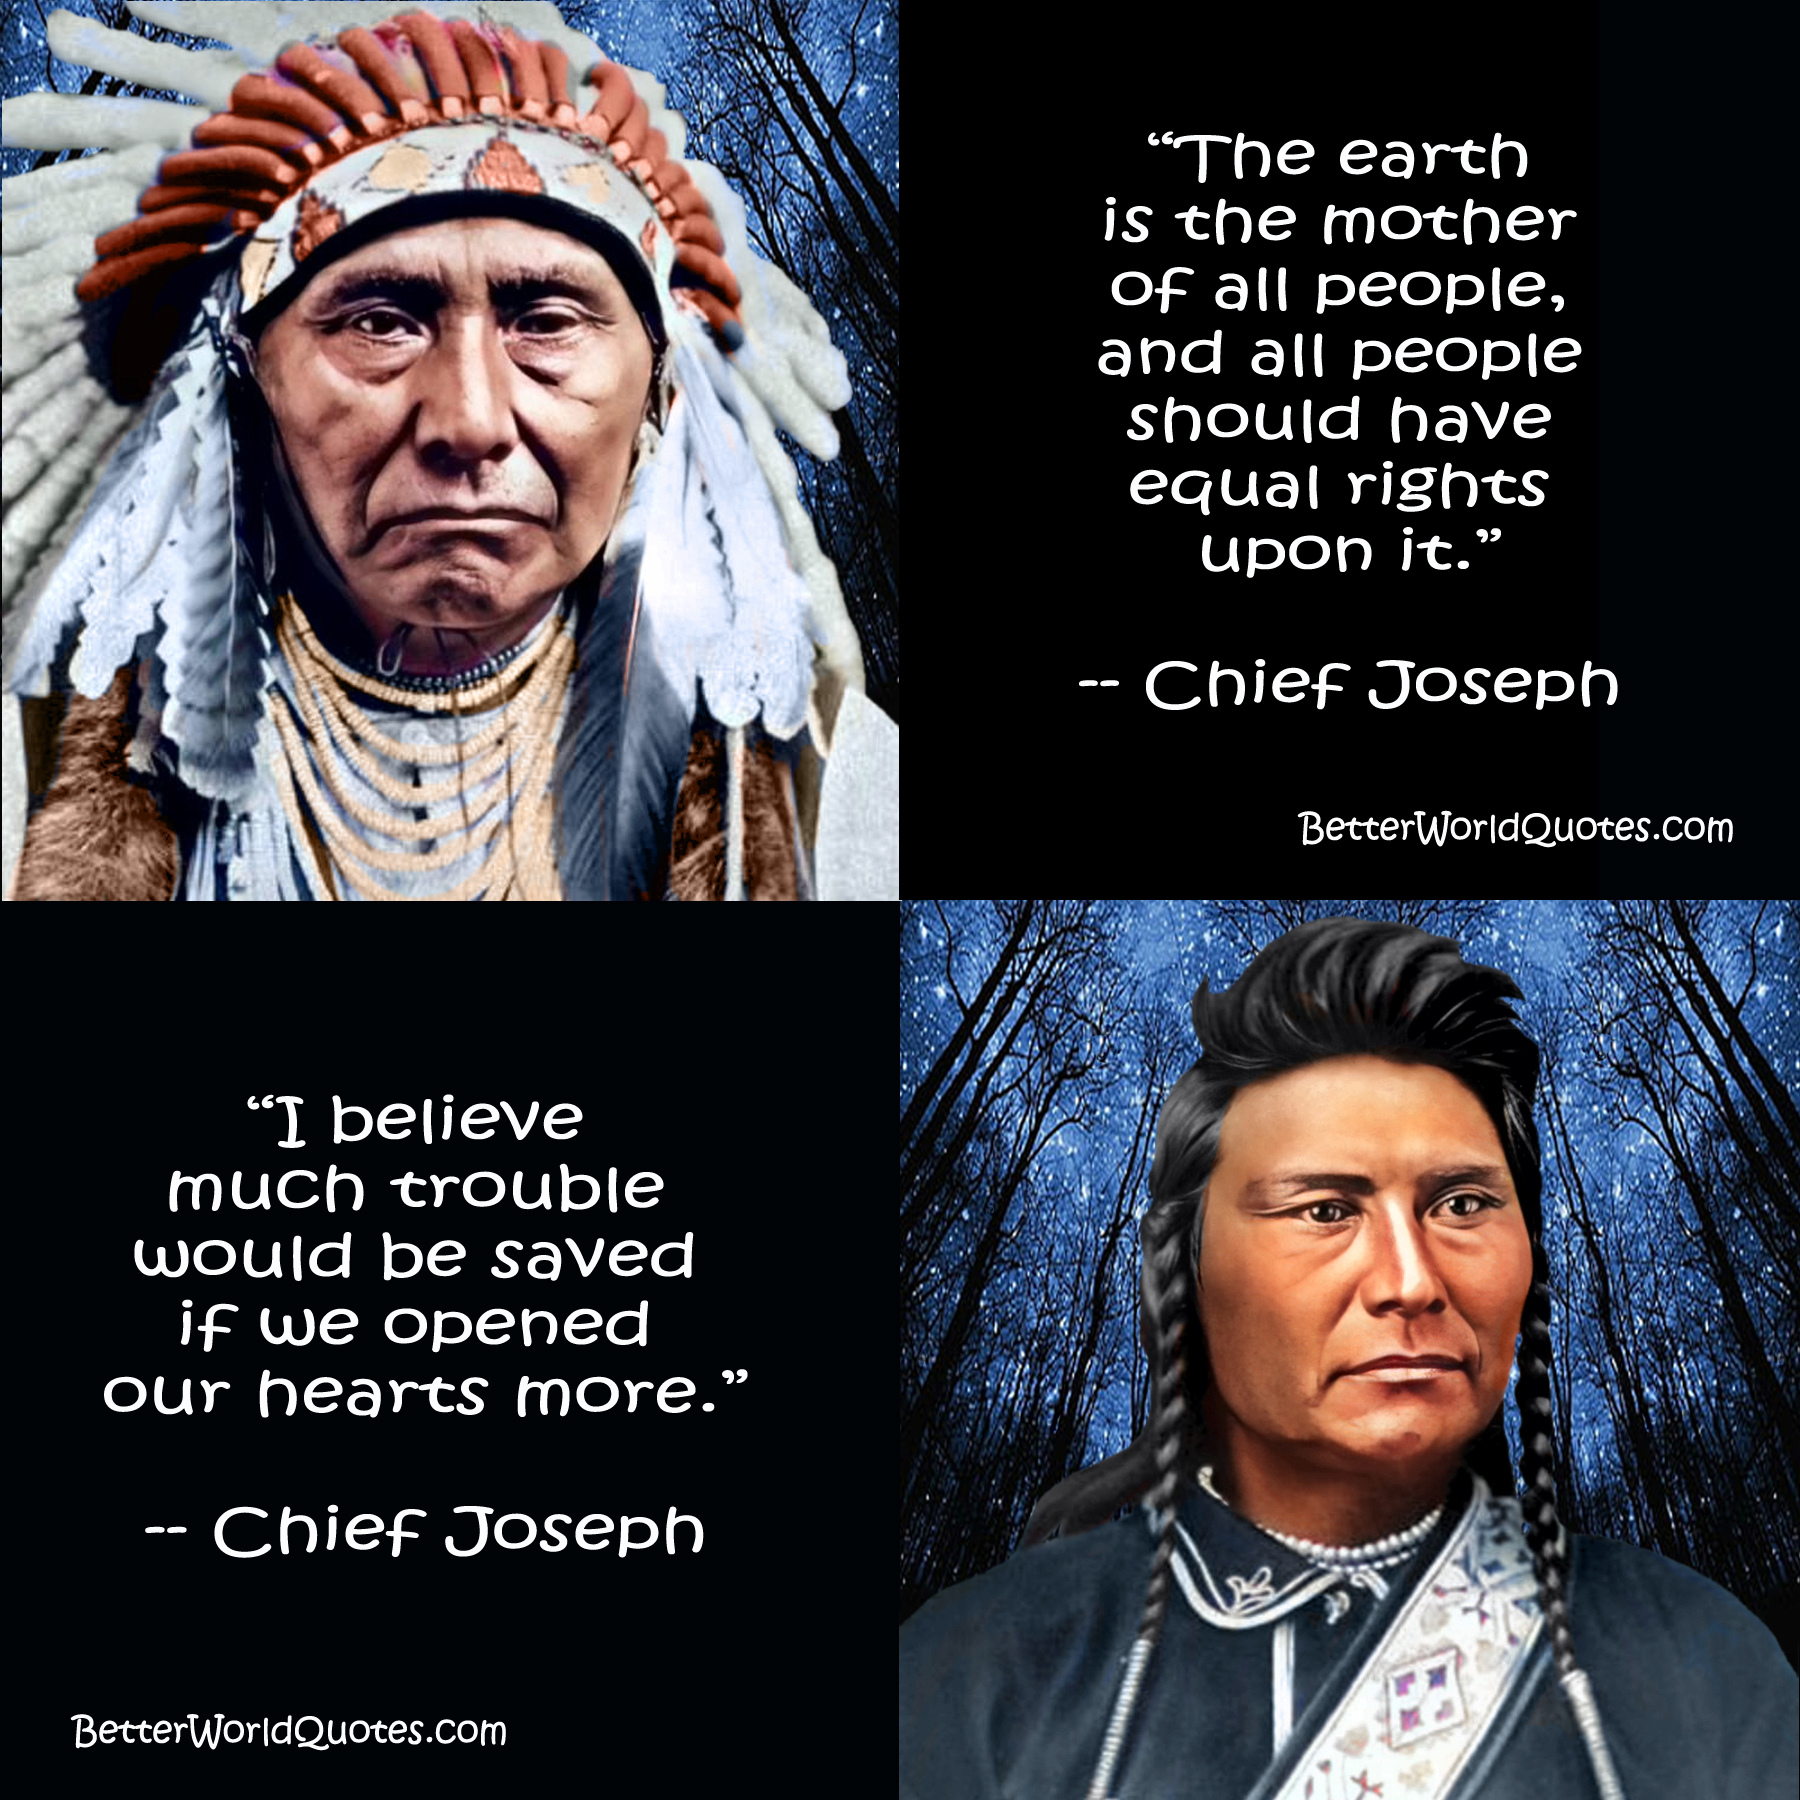 Chief Joseph: The earth is the mother of all people, and all people should have equal rights upon it.